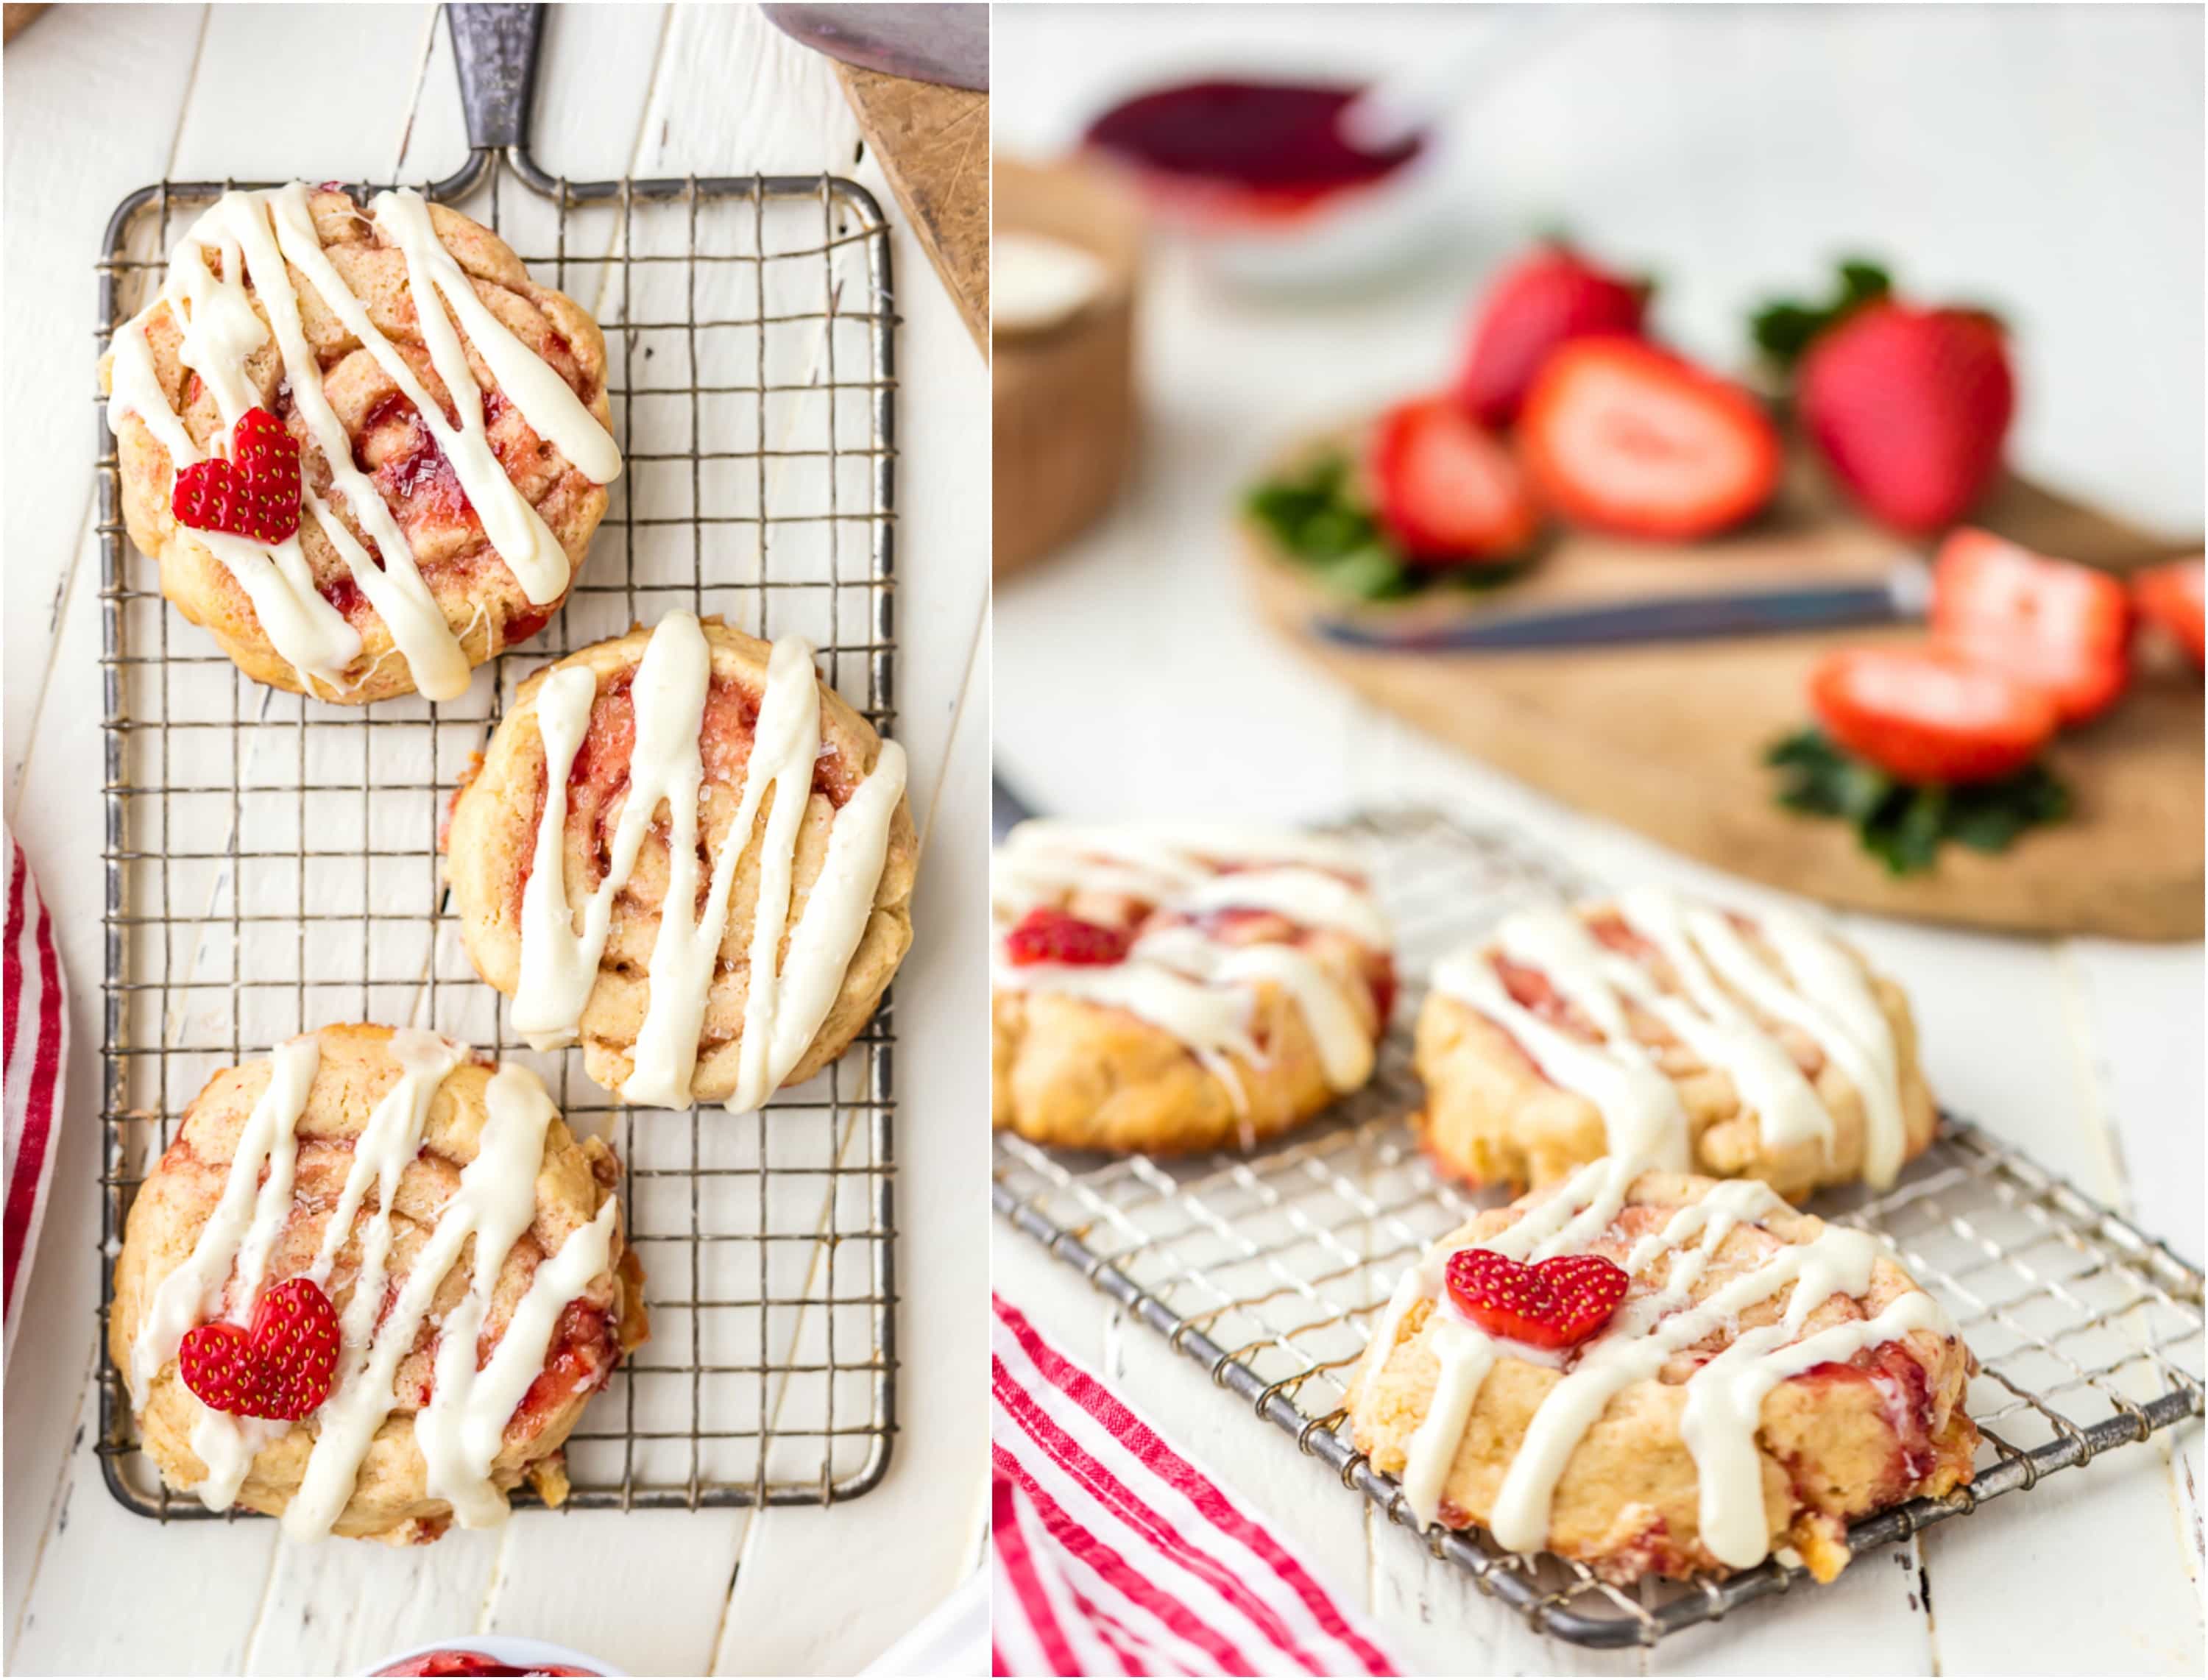 Strawberry Cinnamon Roll Cookies for Valentine's Day! These are such sweet sugar cookies perfect for any occasion, they look just like cinnamon rolls and taste like perfection! Cutest recipe ever!